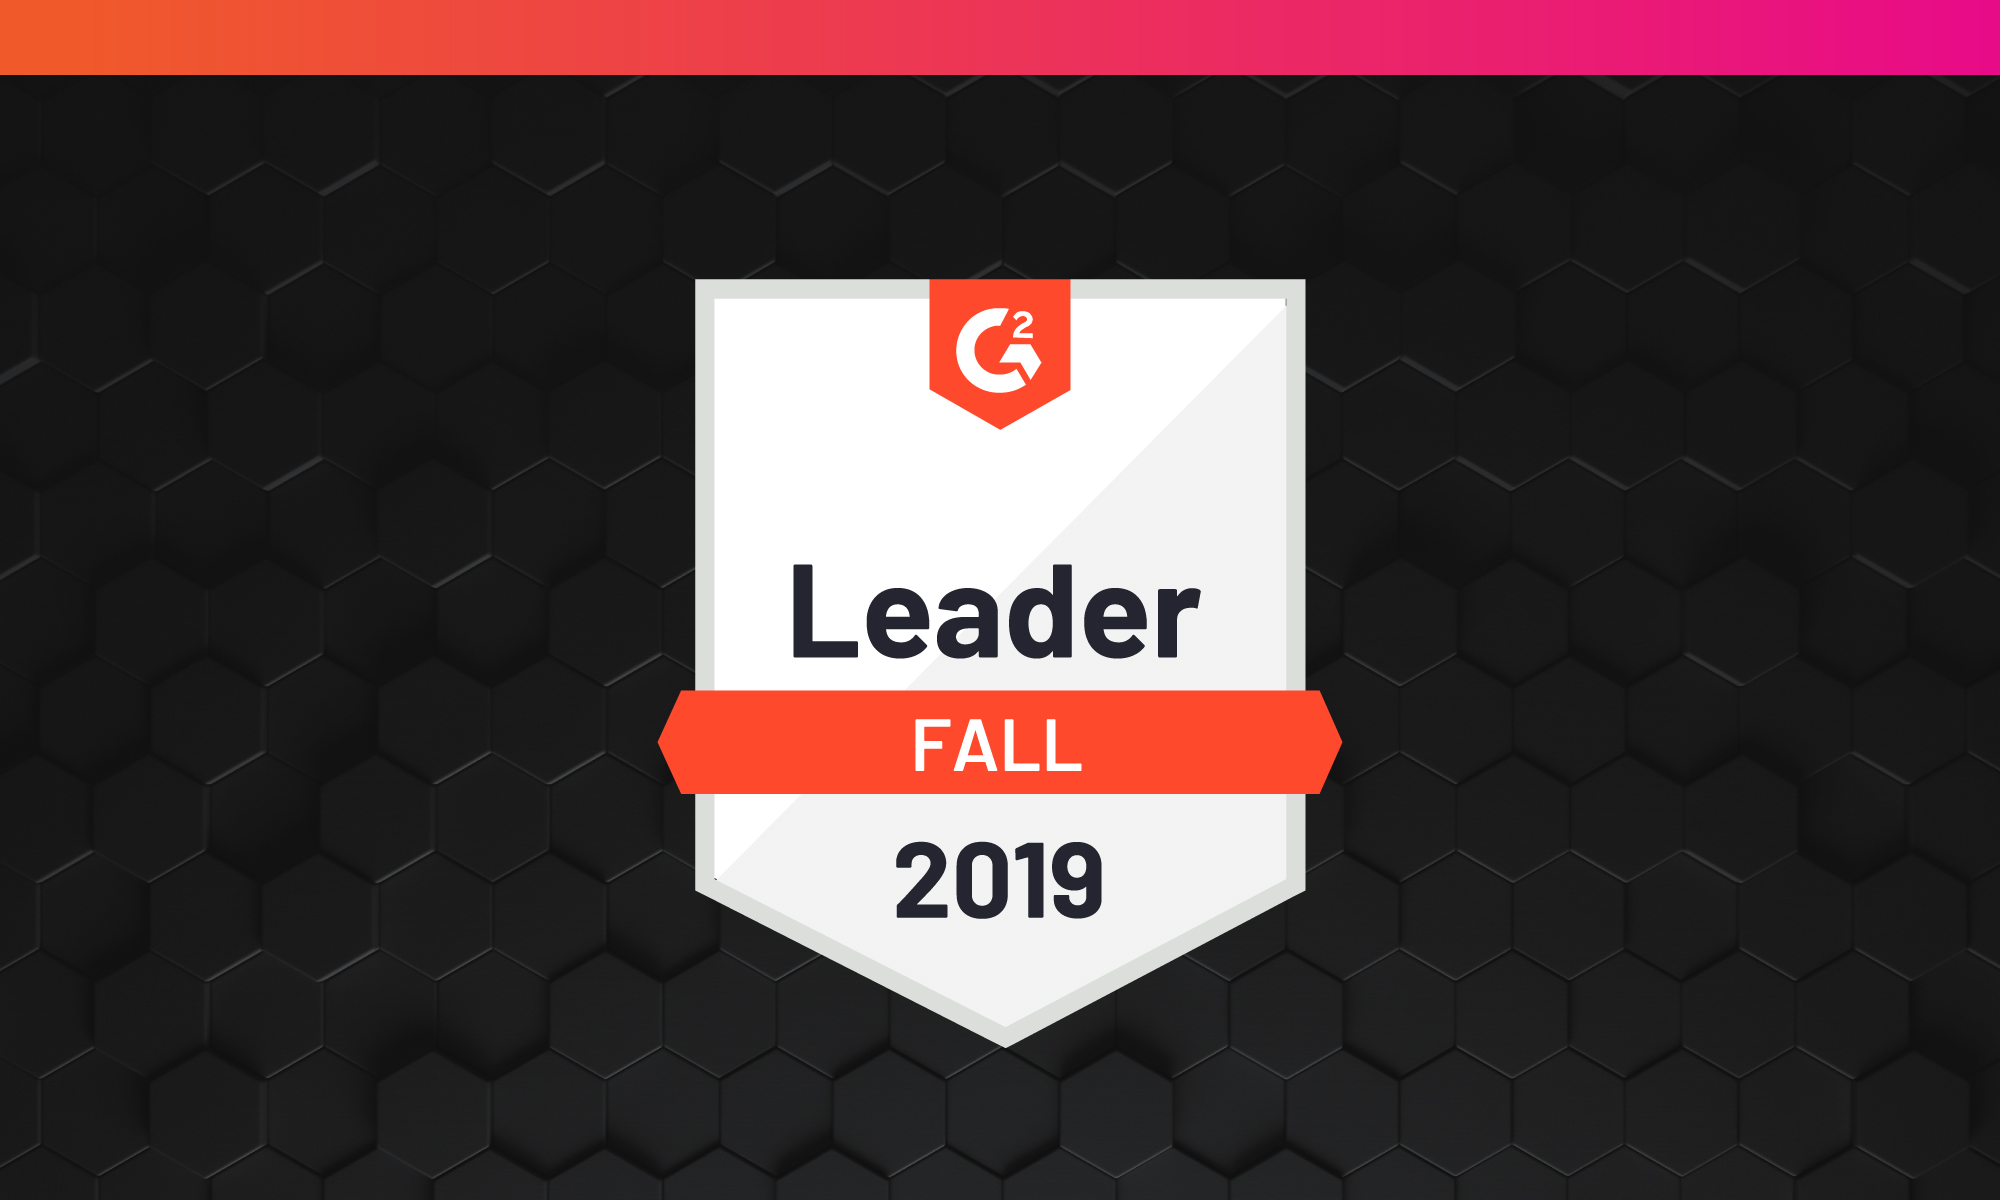 Pluralsight is the top-rated platform in two categories: Corporate LMS and Technical Skills Development